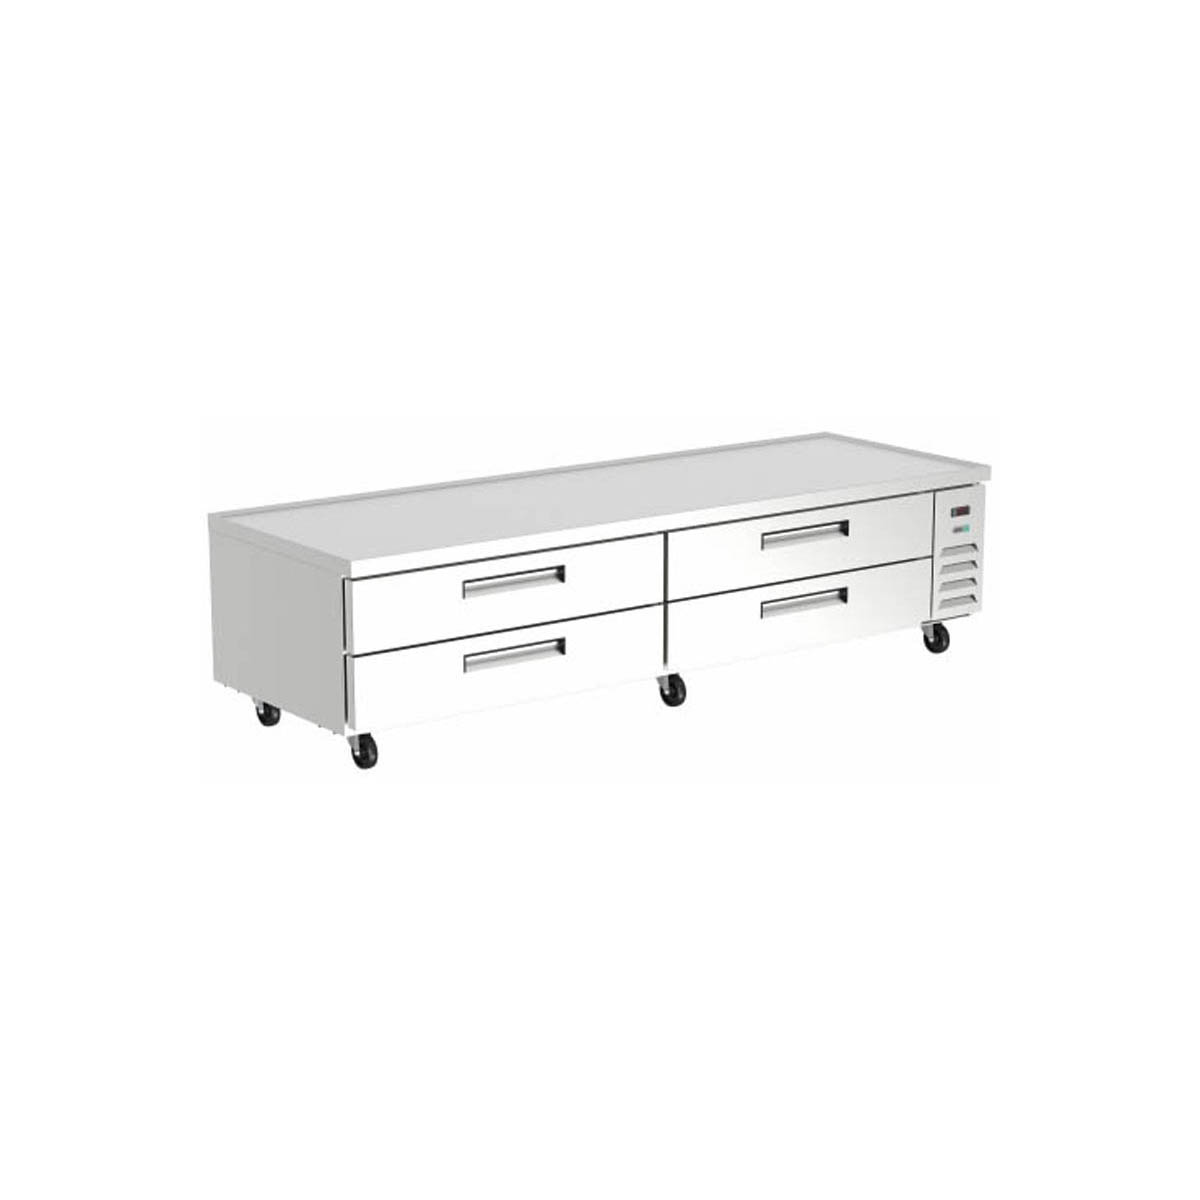 Asber ACBR-96 96″ 4 Drawers Chef Base Refrigerated Equipment Stand